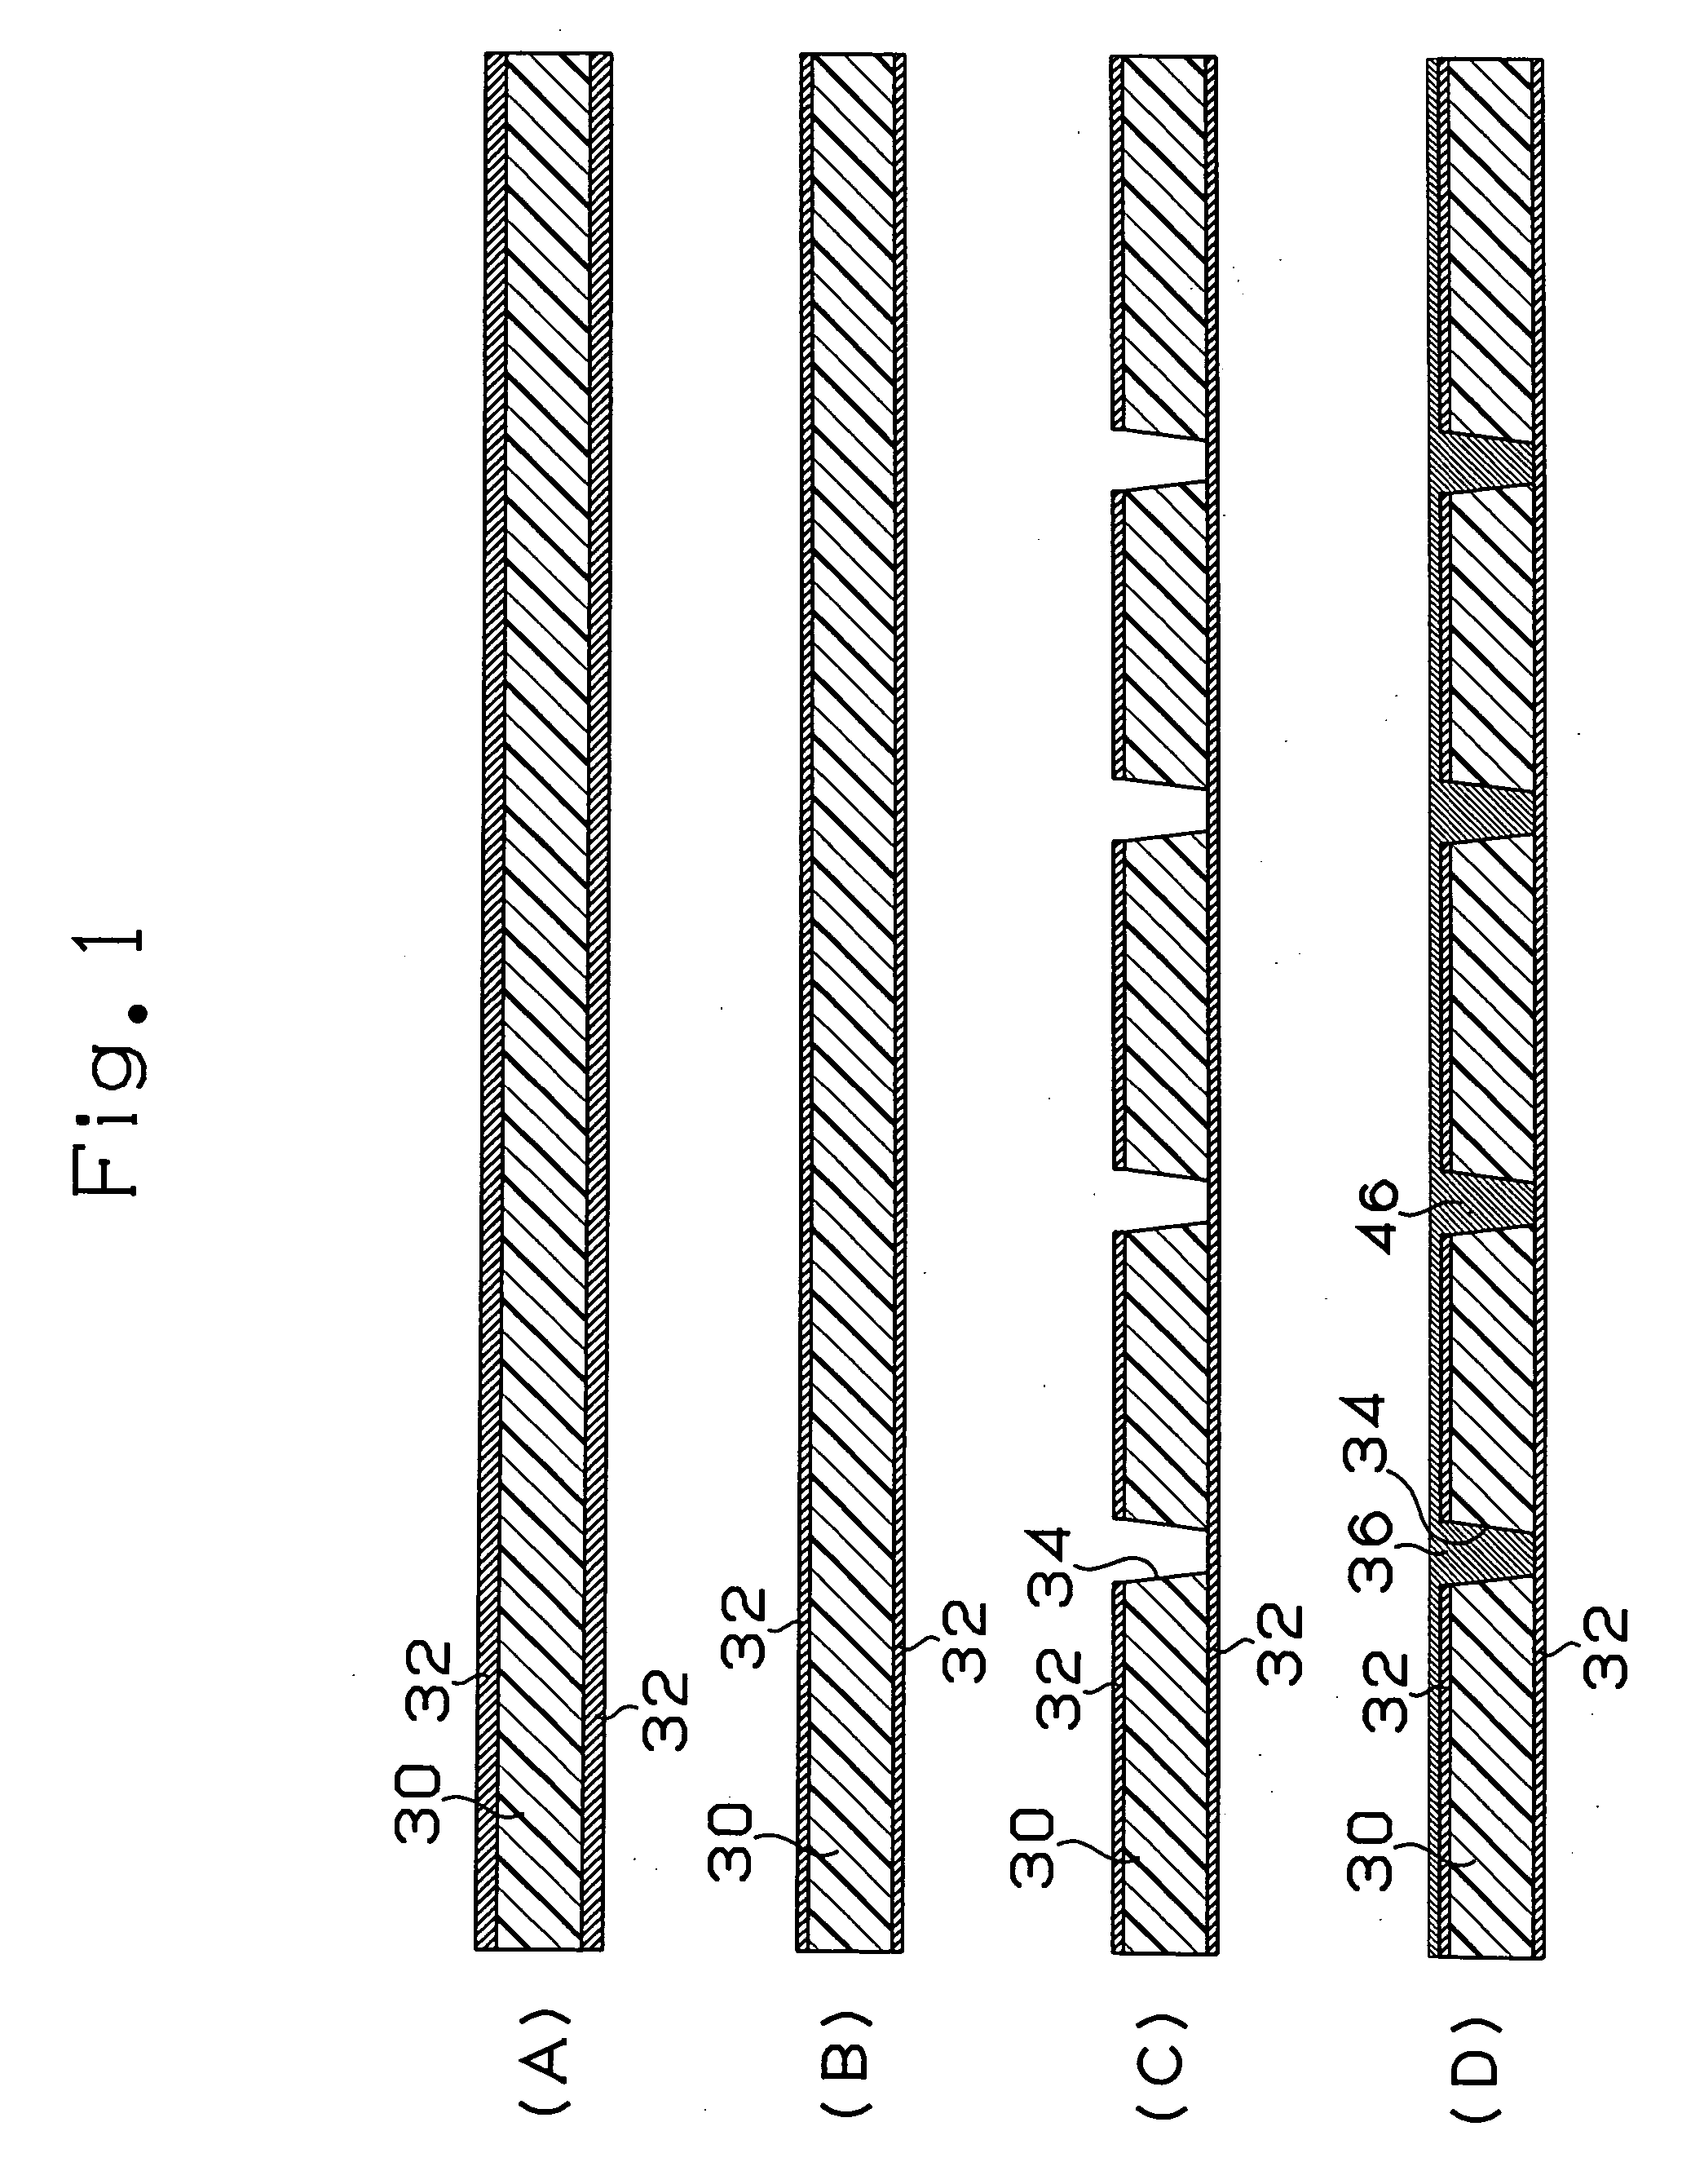 Multilayer printed wiring board and manufacturing method of the multilayer printed wiring board